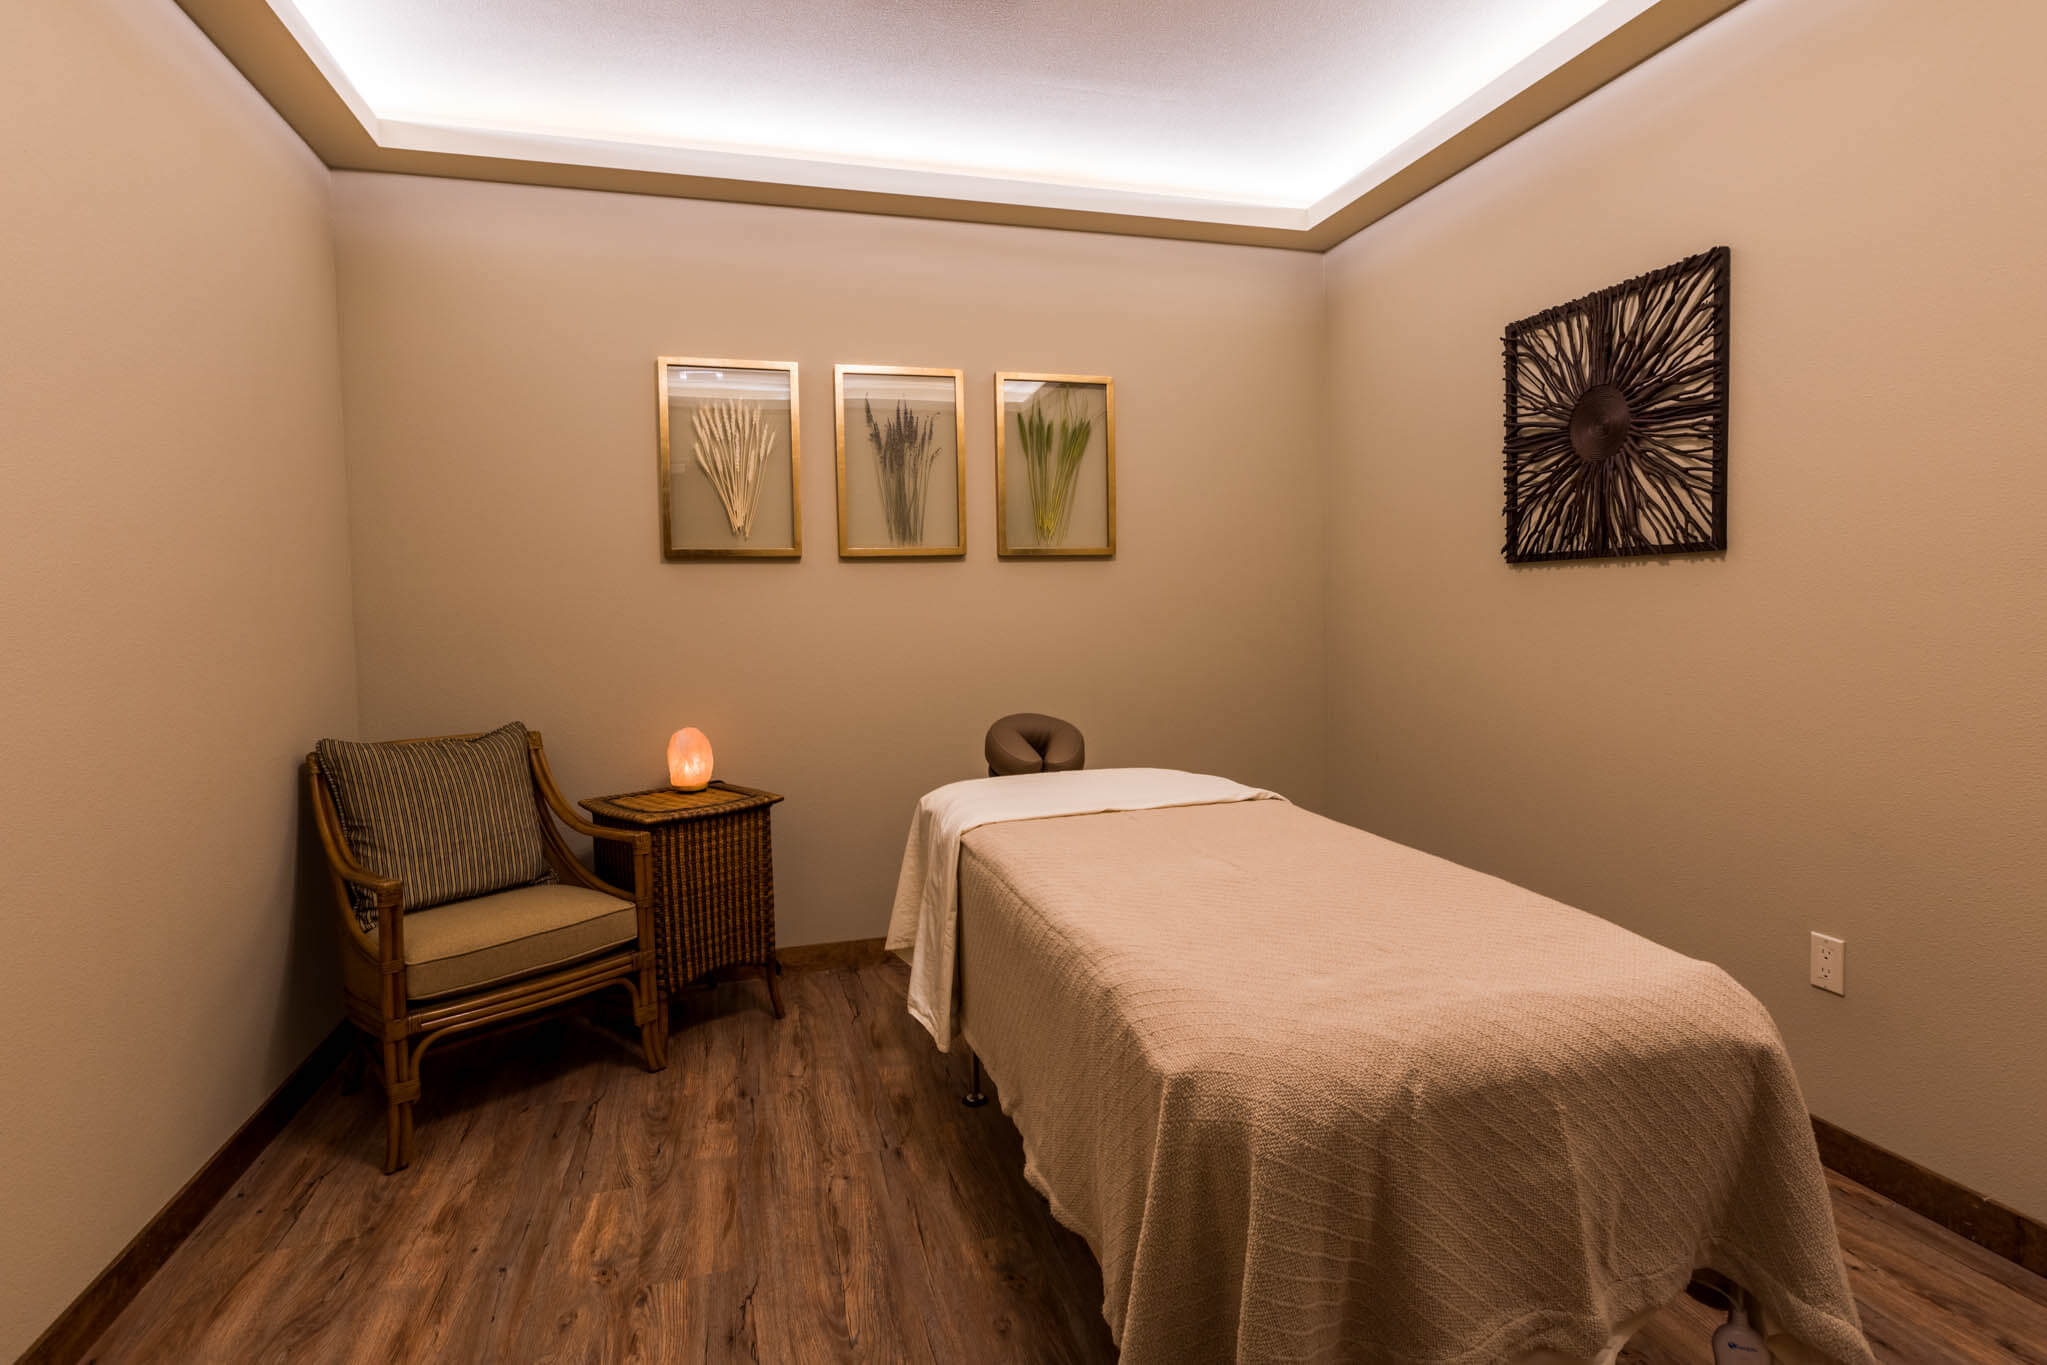 anna wagoner recommends www massage room com pic